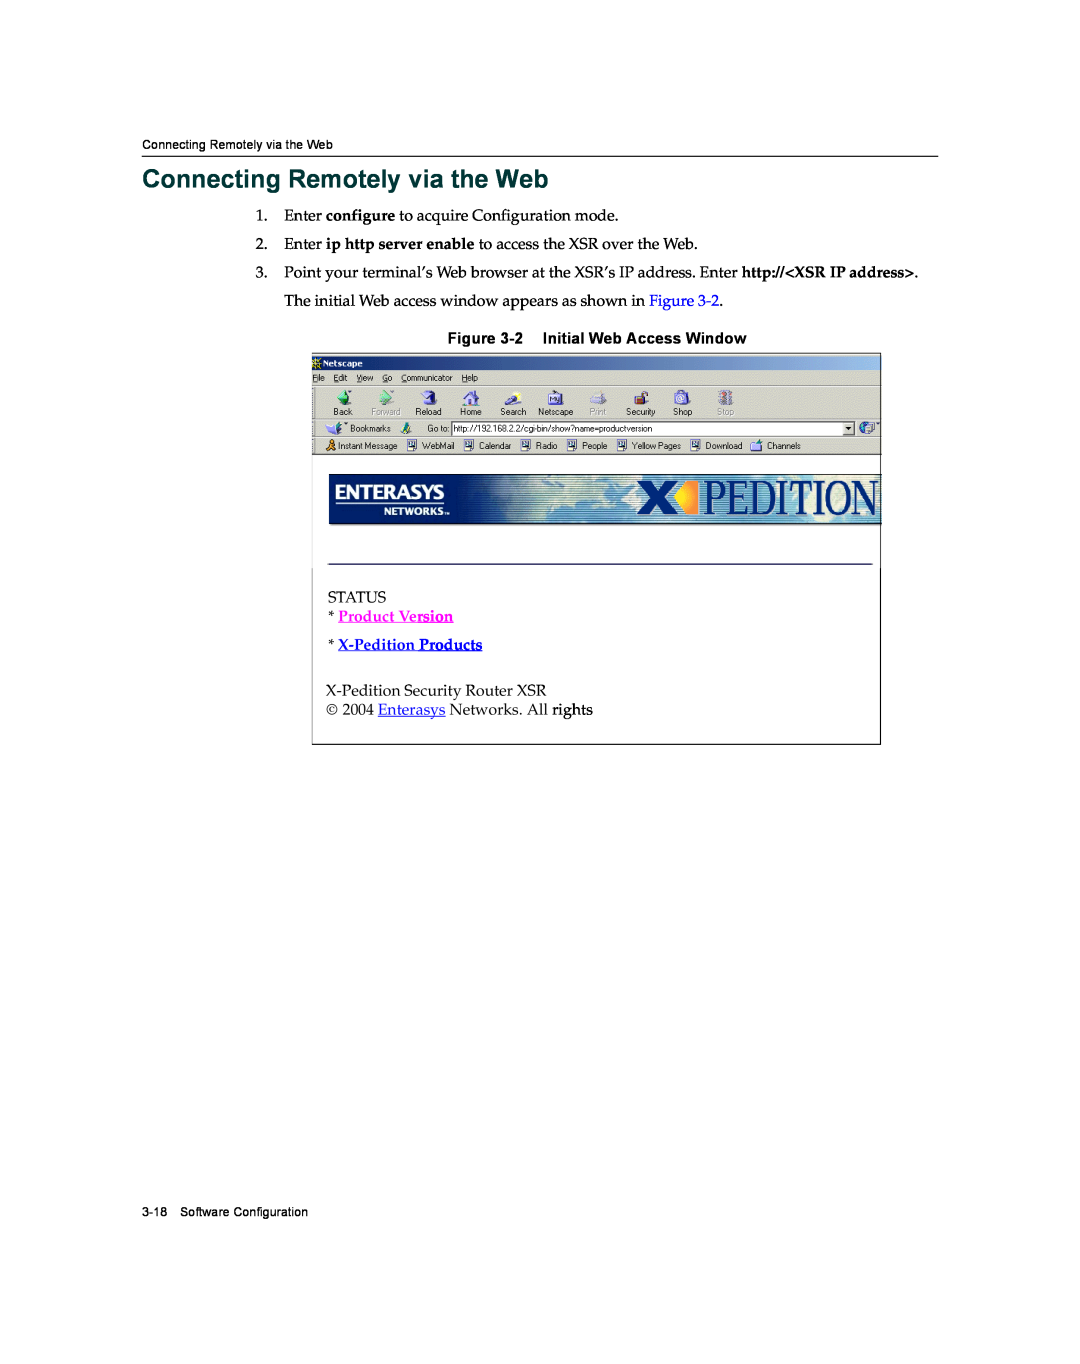 Enterasys Networks XSR-3020 manual Connecting Remotely via the Web, 2 Initial Web Access Window, Product Version 